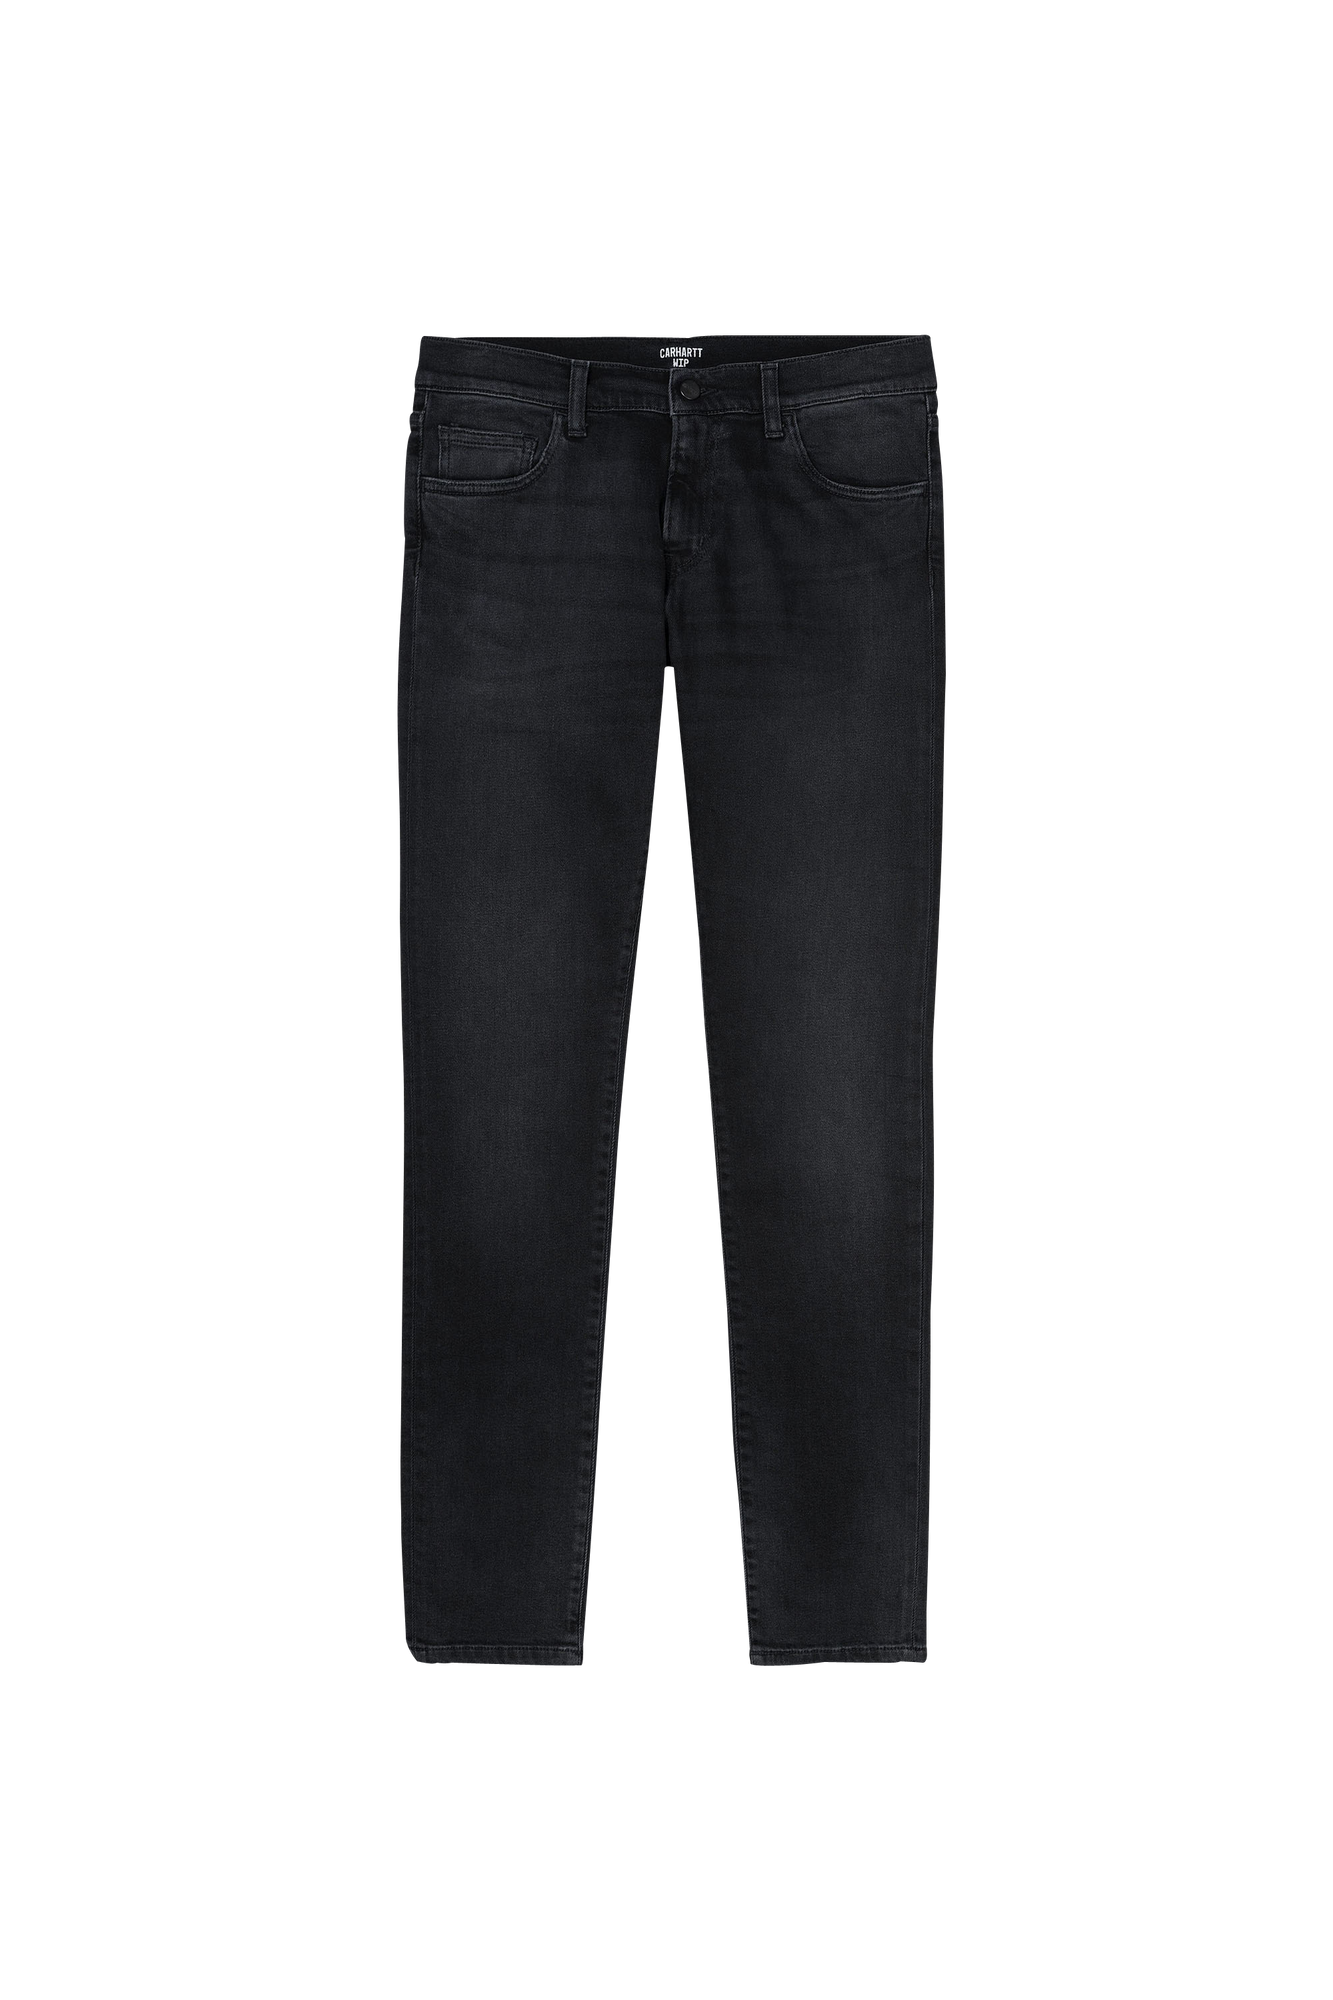 Carhartt Wip - Jean slim-fit taille normale en coton stretch